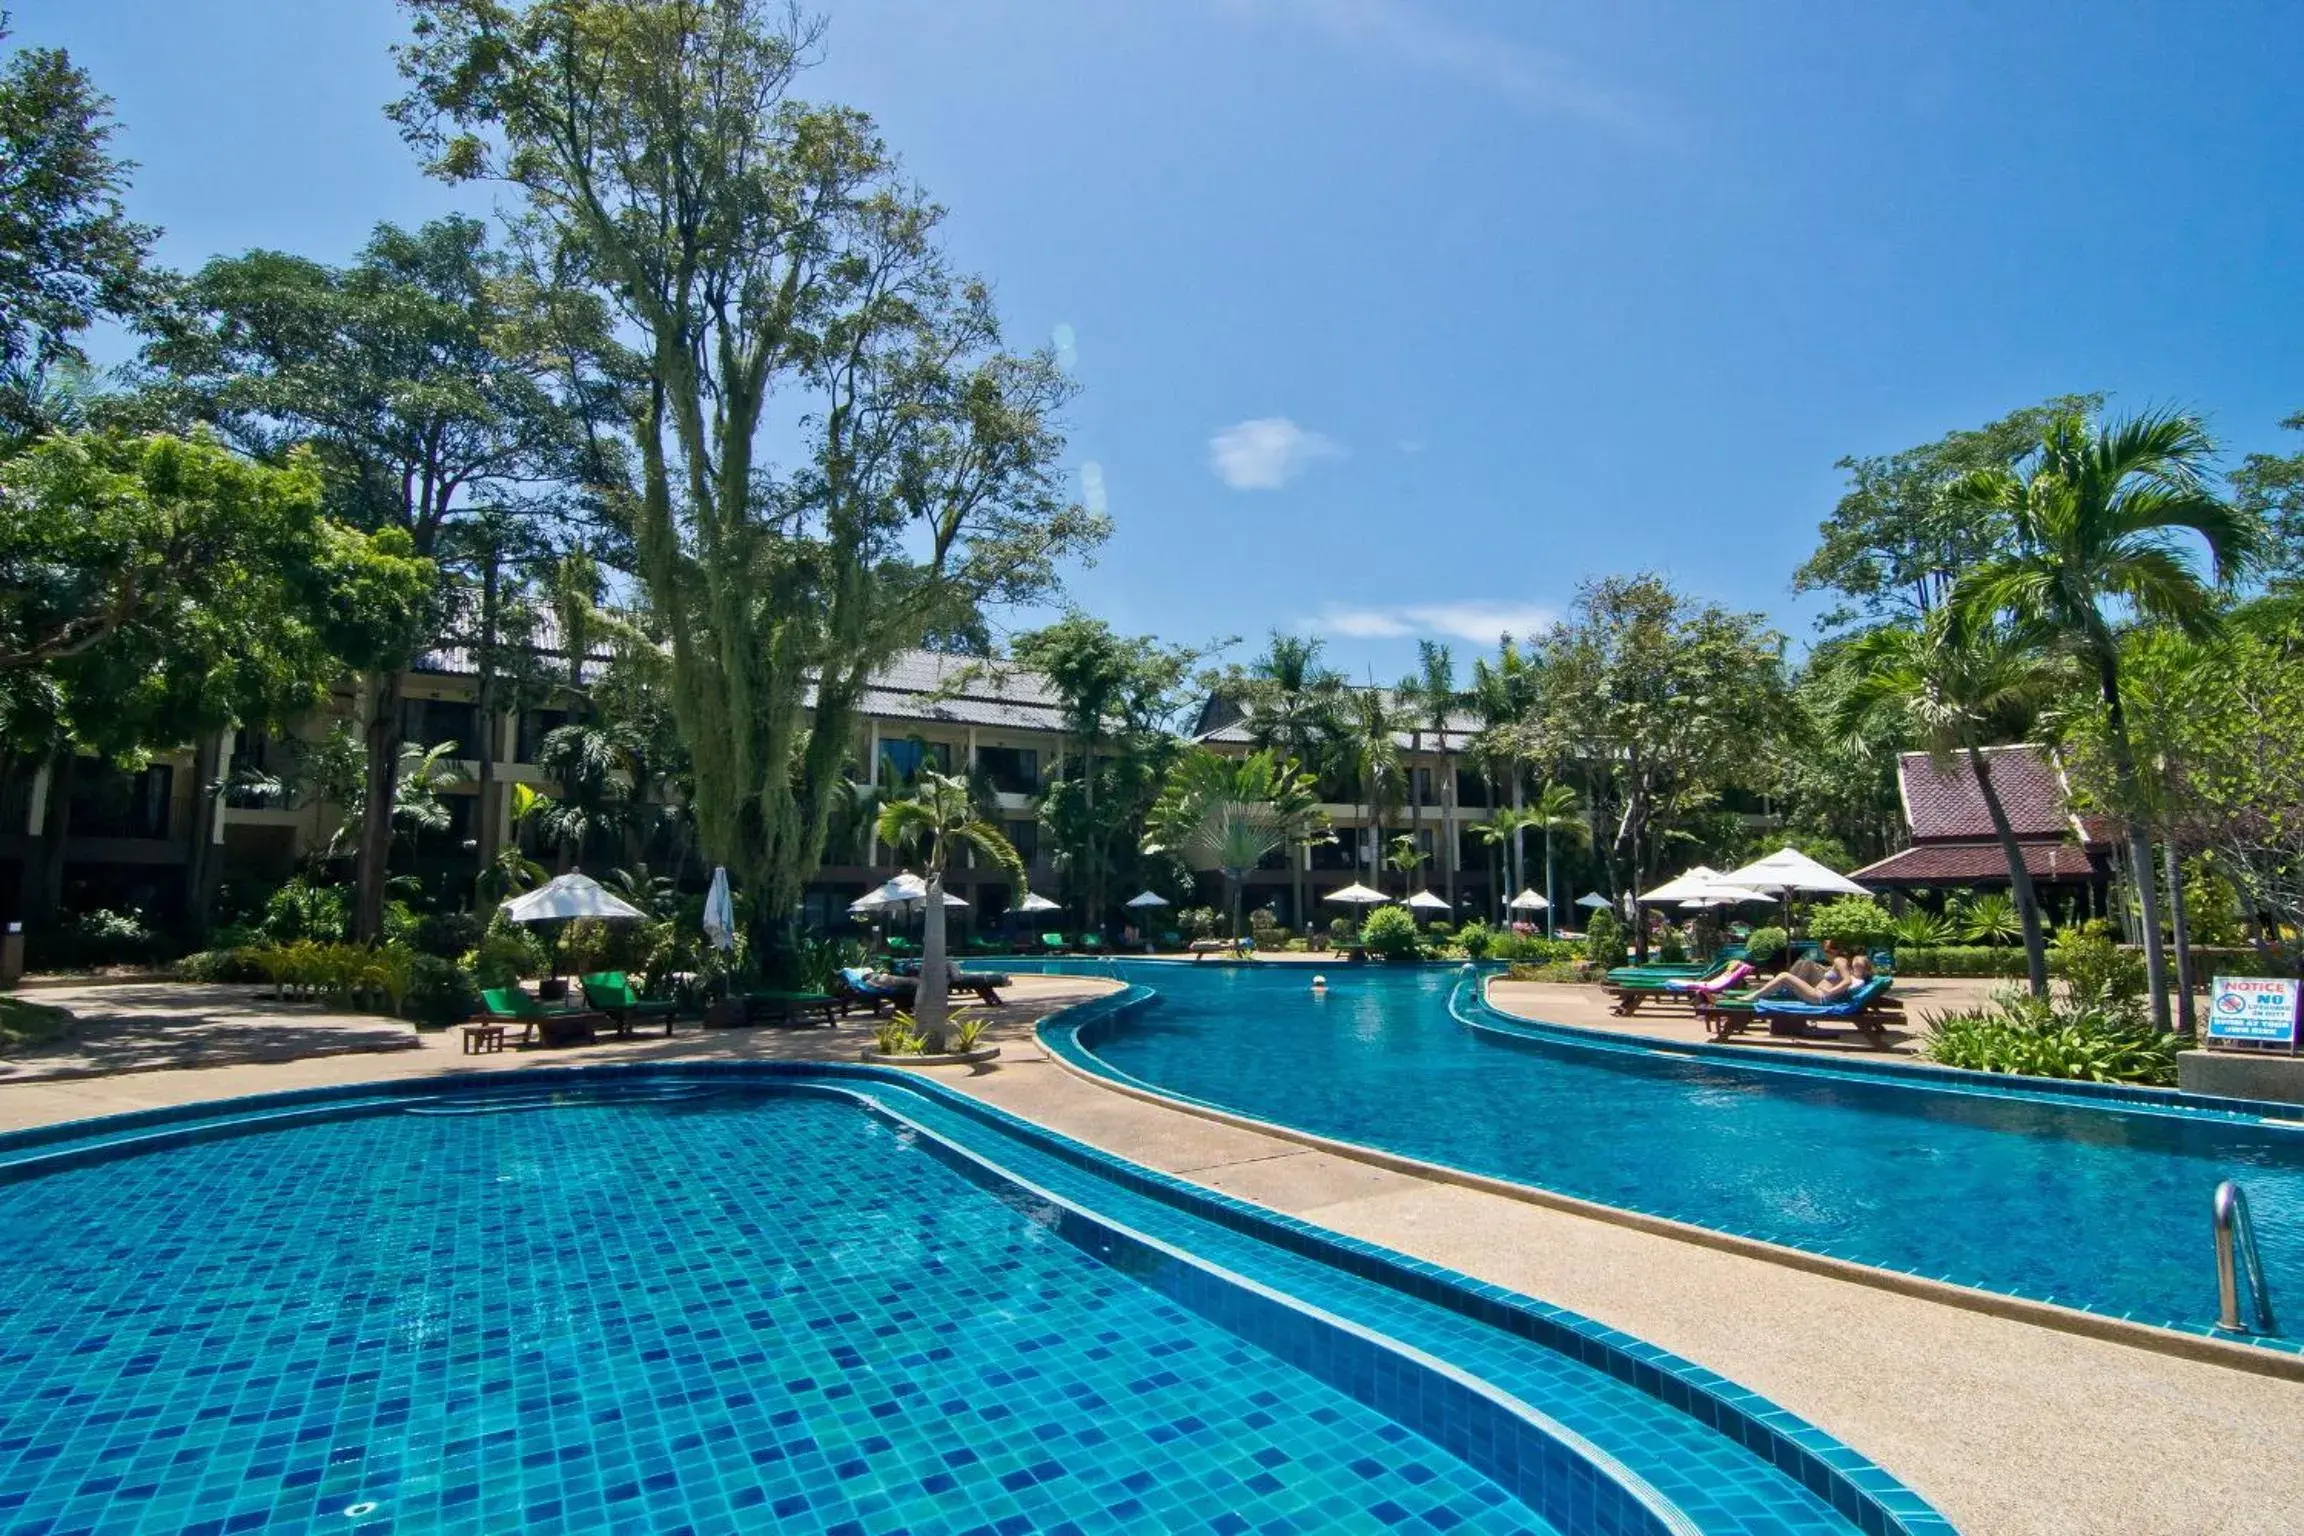 Swimming Pool in The Green Park Resort - SHA Extra Plus